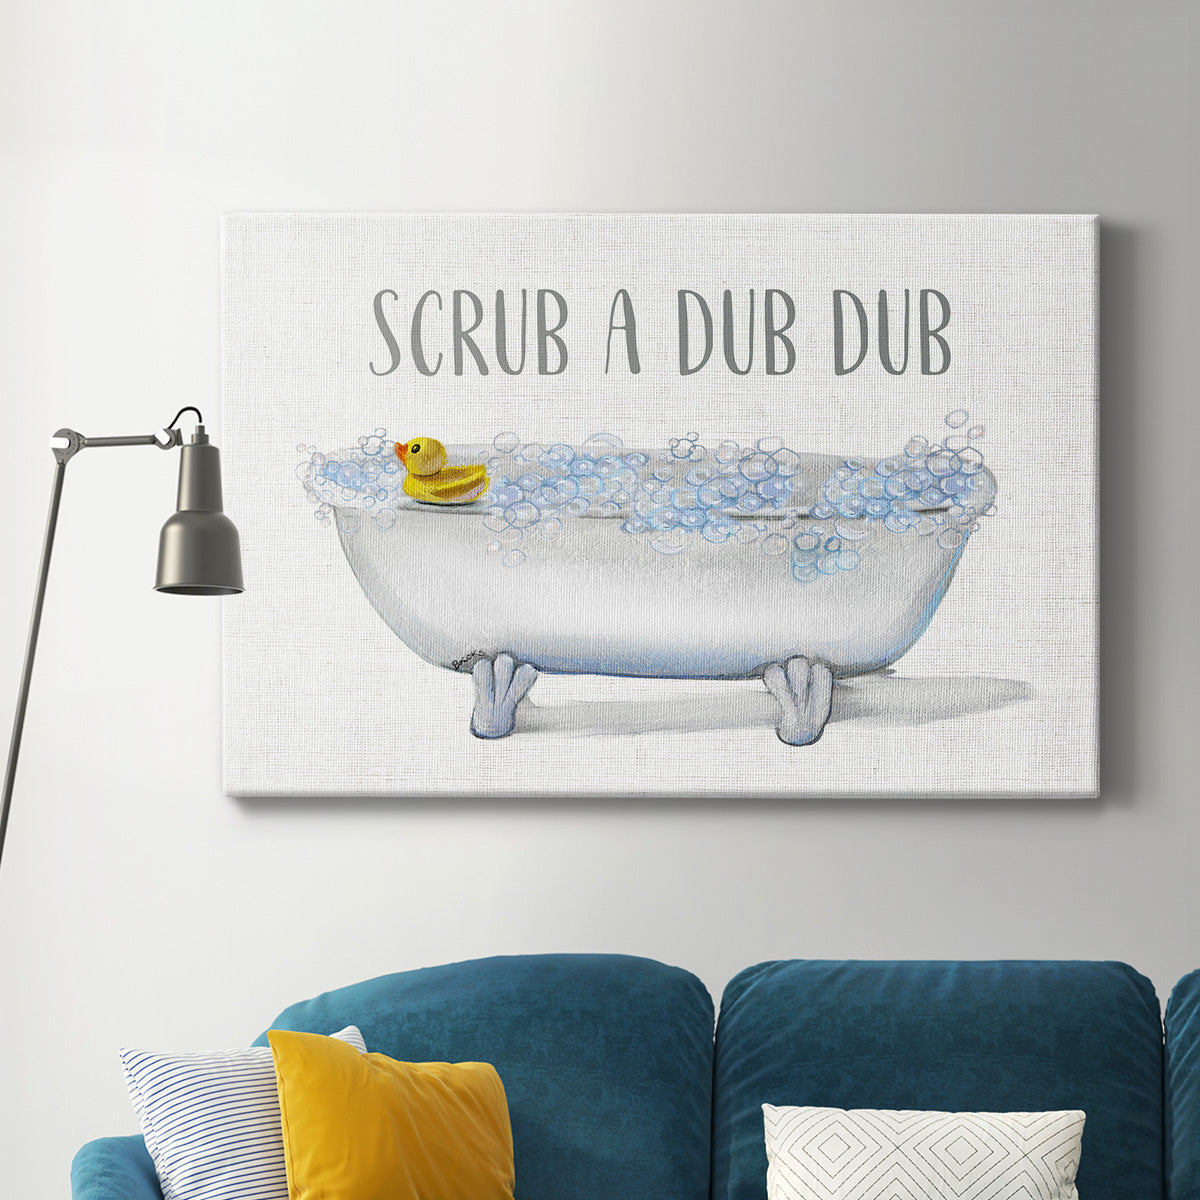 Scrub A Dub Premium Gallery Wrapped Canvas - Ready to Hang